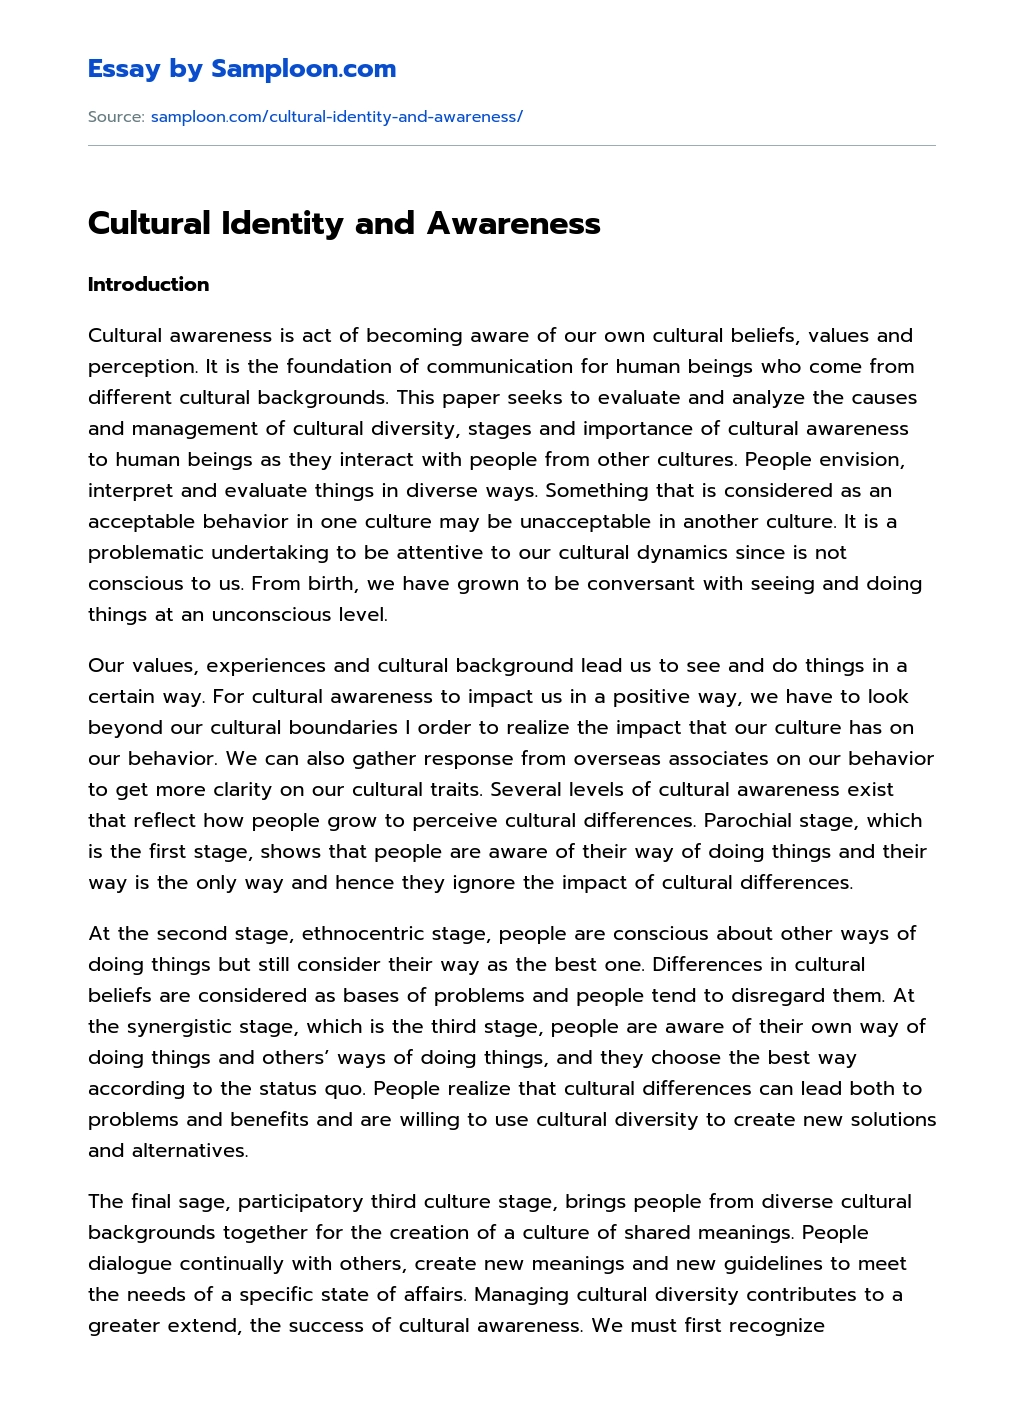 Cultural Identity and Awareness essay